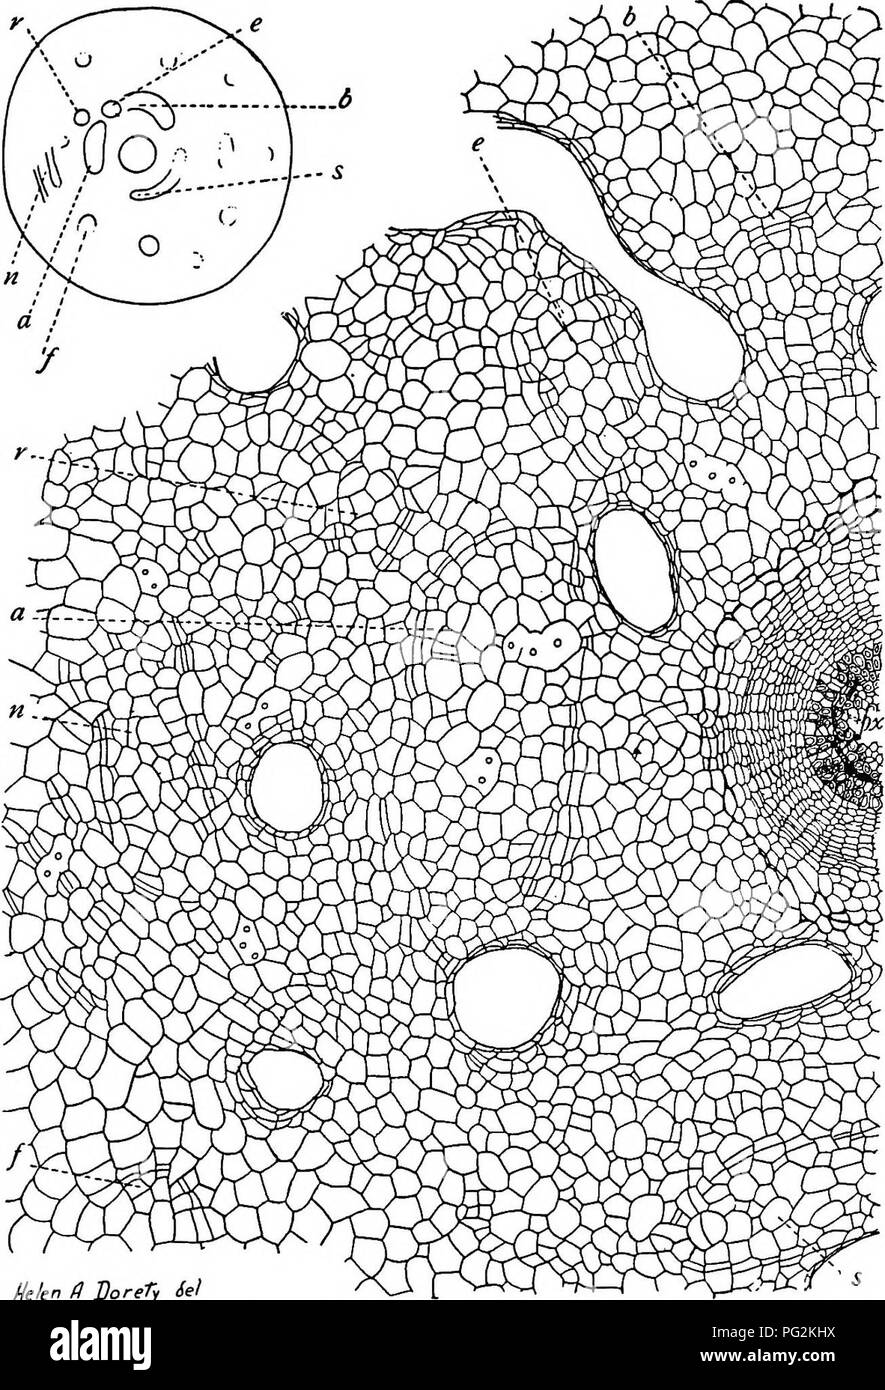 . Morphology of gymnosperms. Gymnosperms; Plant morphology. I02 MORPHOLOGY OF GYMNOSPERMS. Mekn /? doreTy iel Fig. 78.—Ceratozamia mexicana: transverse section of hypocotyl slightly below exit of cotyledonary traces; the diagram shows the position of the stele, surrounded by three large groups of extrafascicular cambium (a, 6, s), and some smaller groups like e and r; the drawing shows a portion of the section indicated in the diagram, including one of the groups of extrafascicular cambium (a), parts of 6 and s, and also the smaller groups (e and ;-); the bundles of the stele are mesarch, with Stock Photo